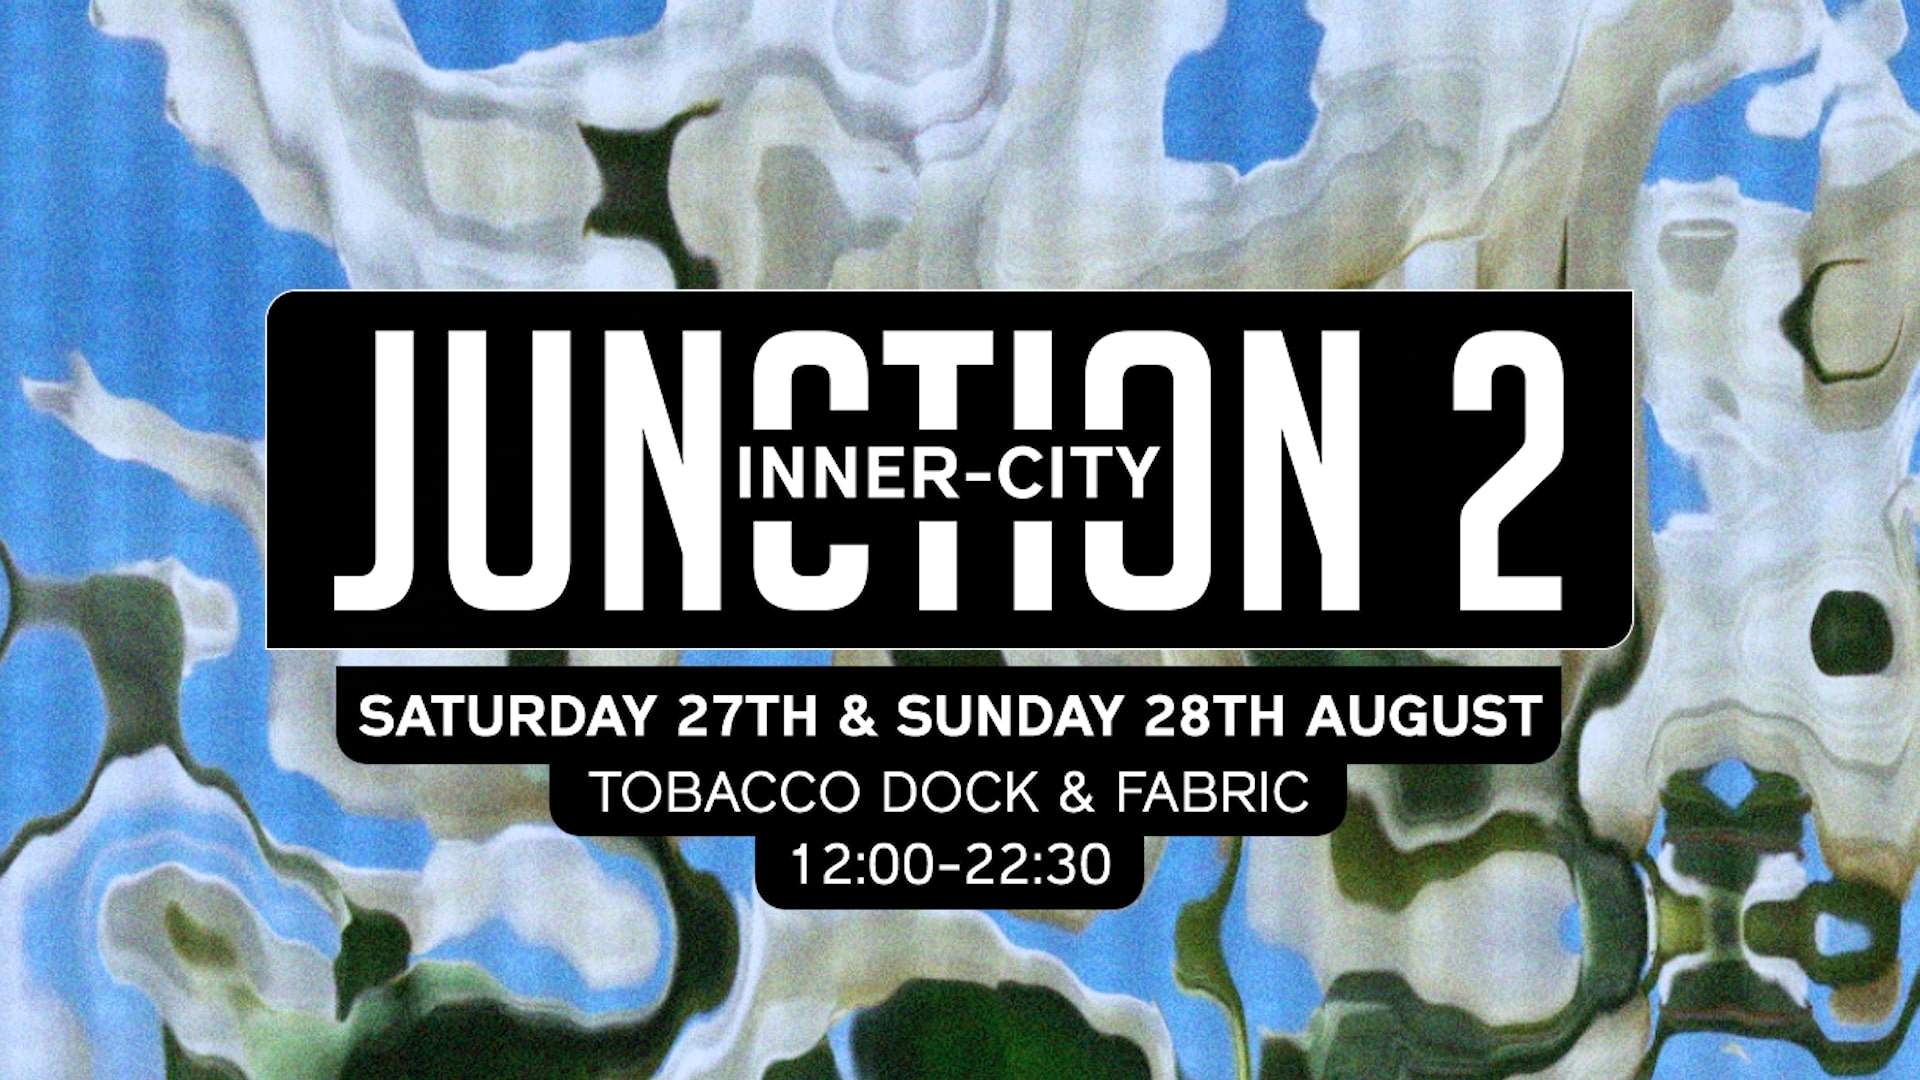 Junction 2 - Inner City: By Day (Sunday) - フライヤー表